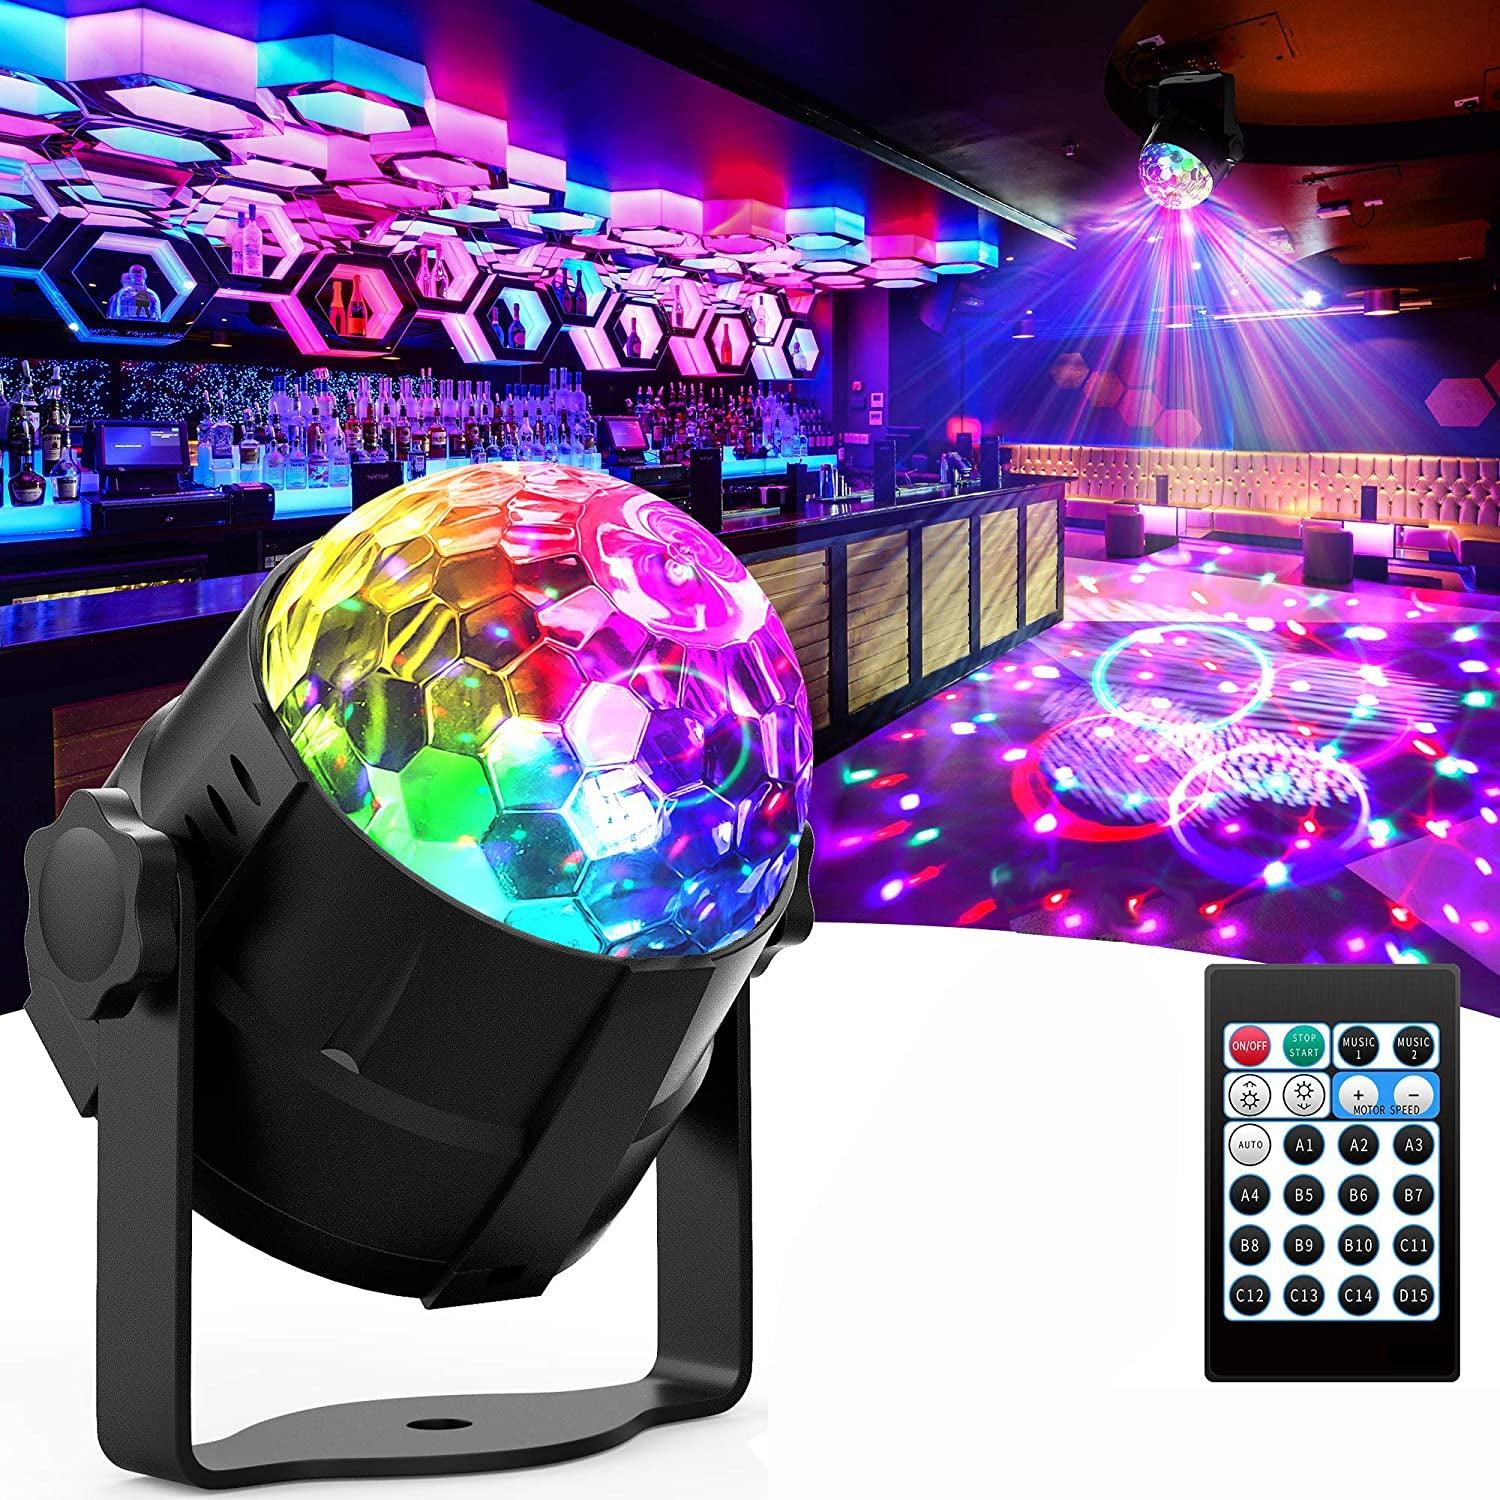 15 Colors Disco Light Ball, Sound Activated Strobe Light With Remote Control for Home Glow Birthday Wedding Parties - If you say i do